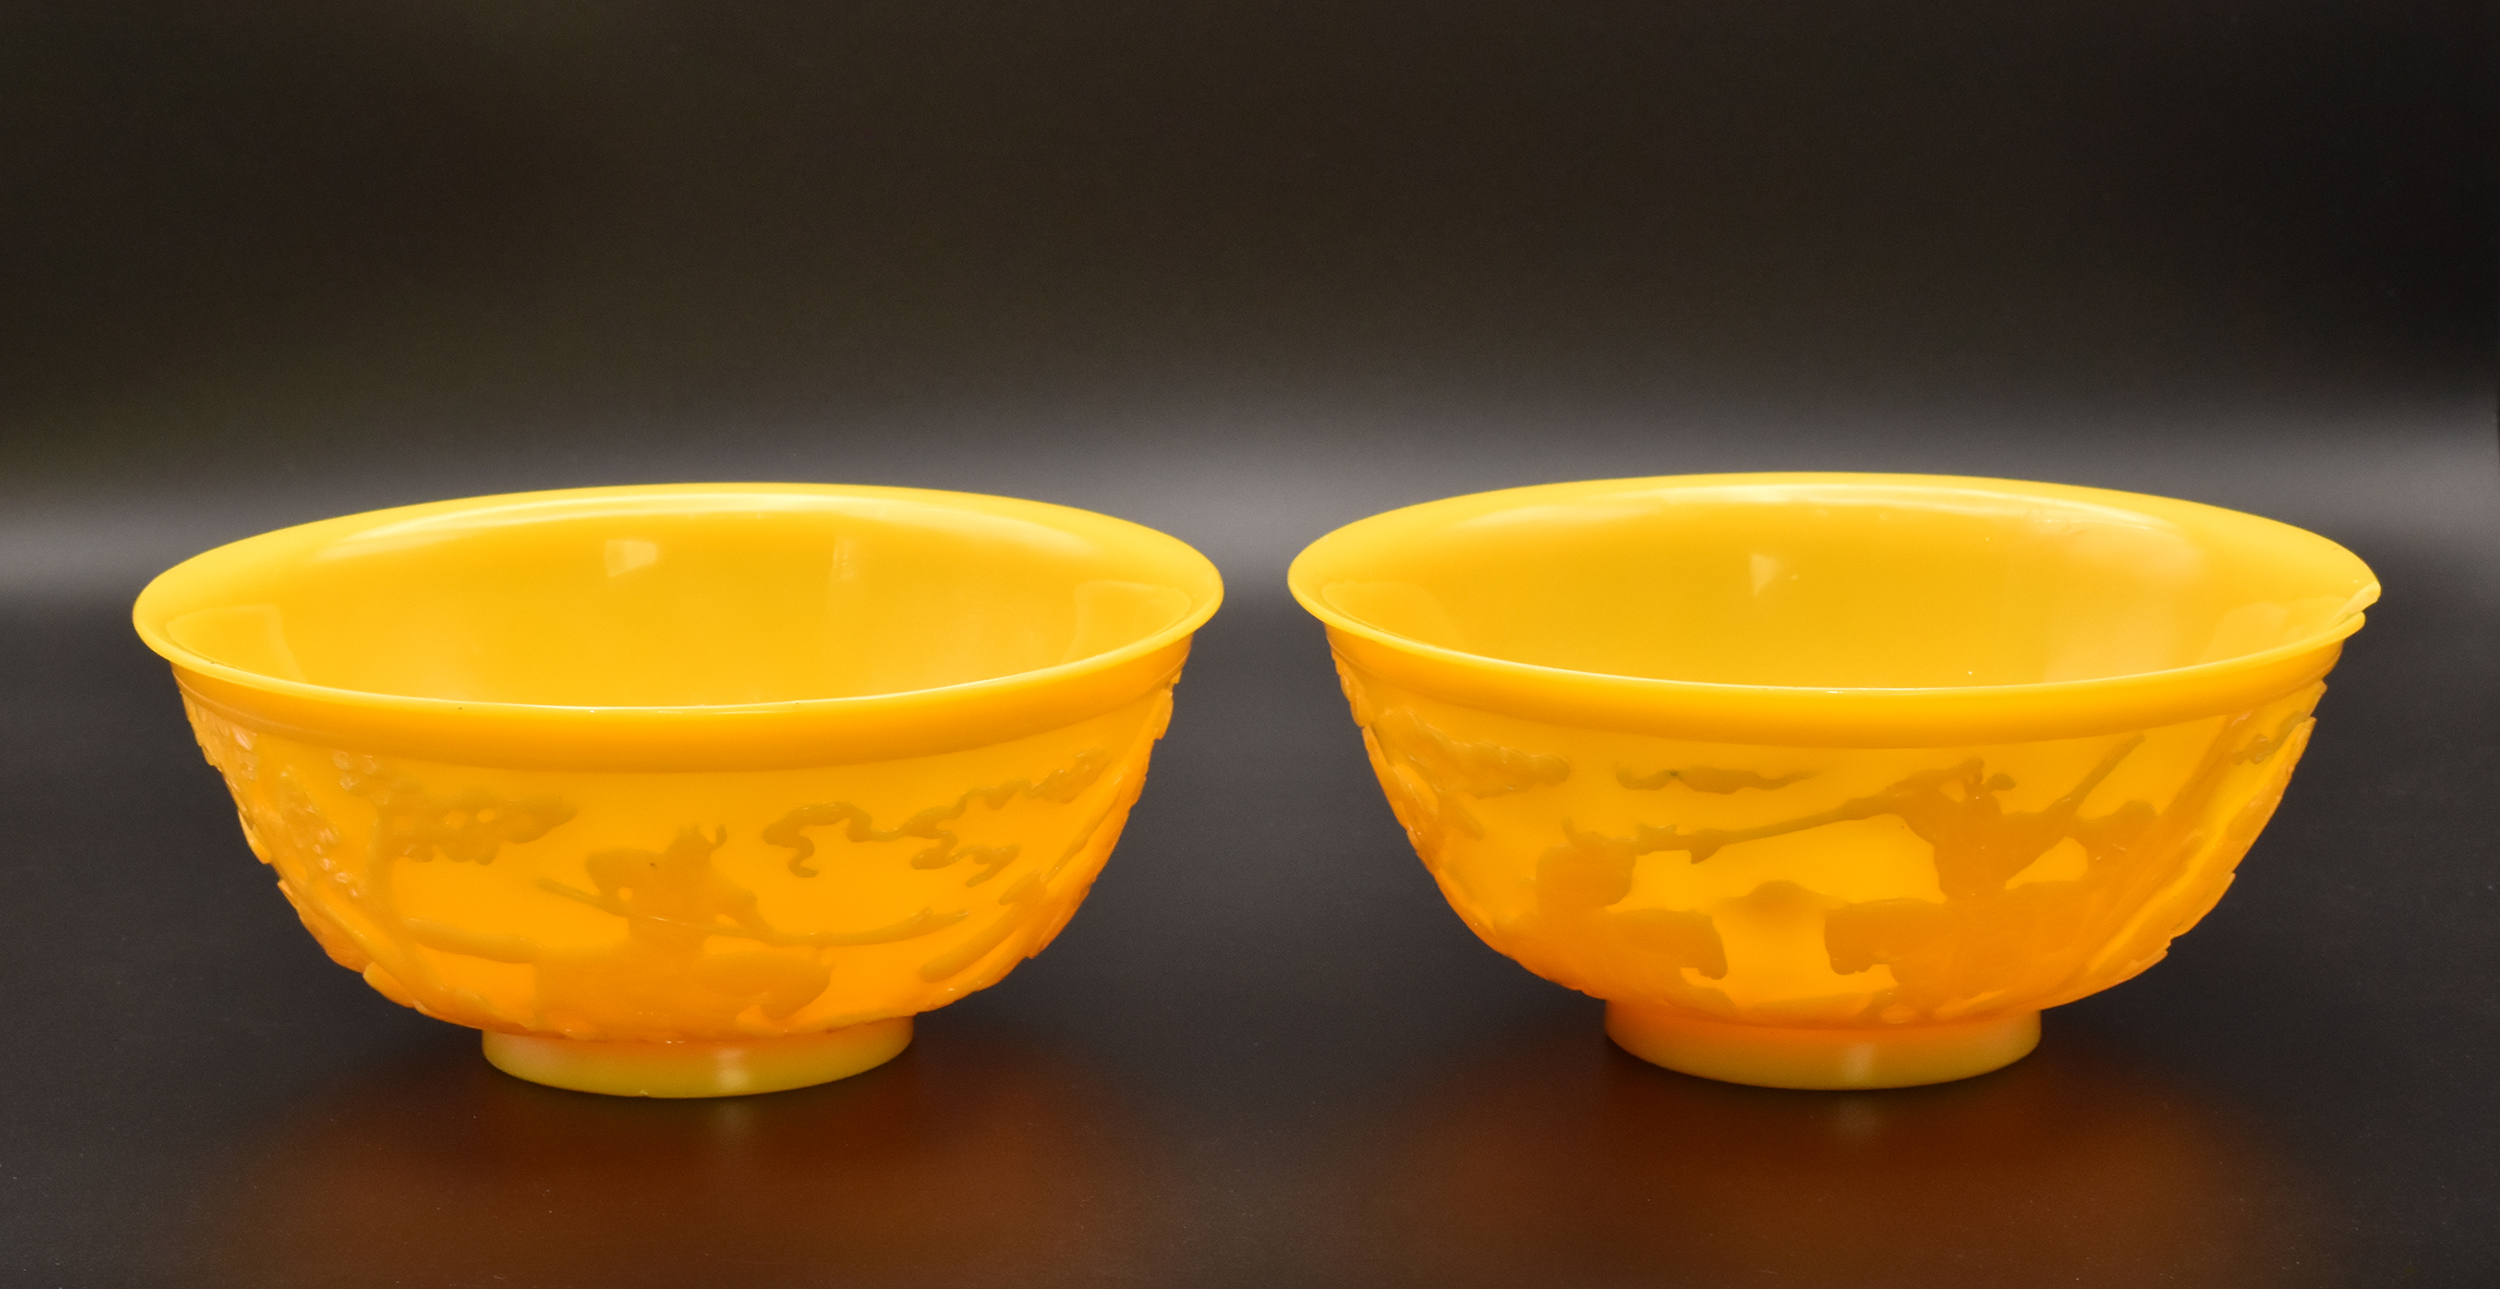 A PAIR OF CHINESE ‘IMPERIAL’ YELLOW GLASS BOWLS, QING DYNASTY, 19TH CENTURY